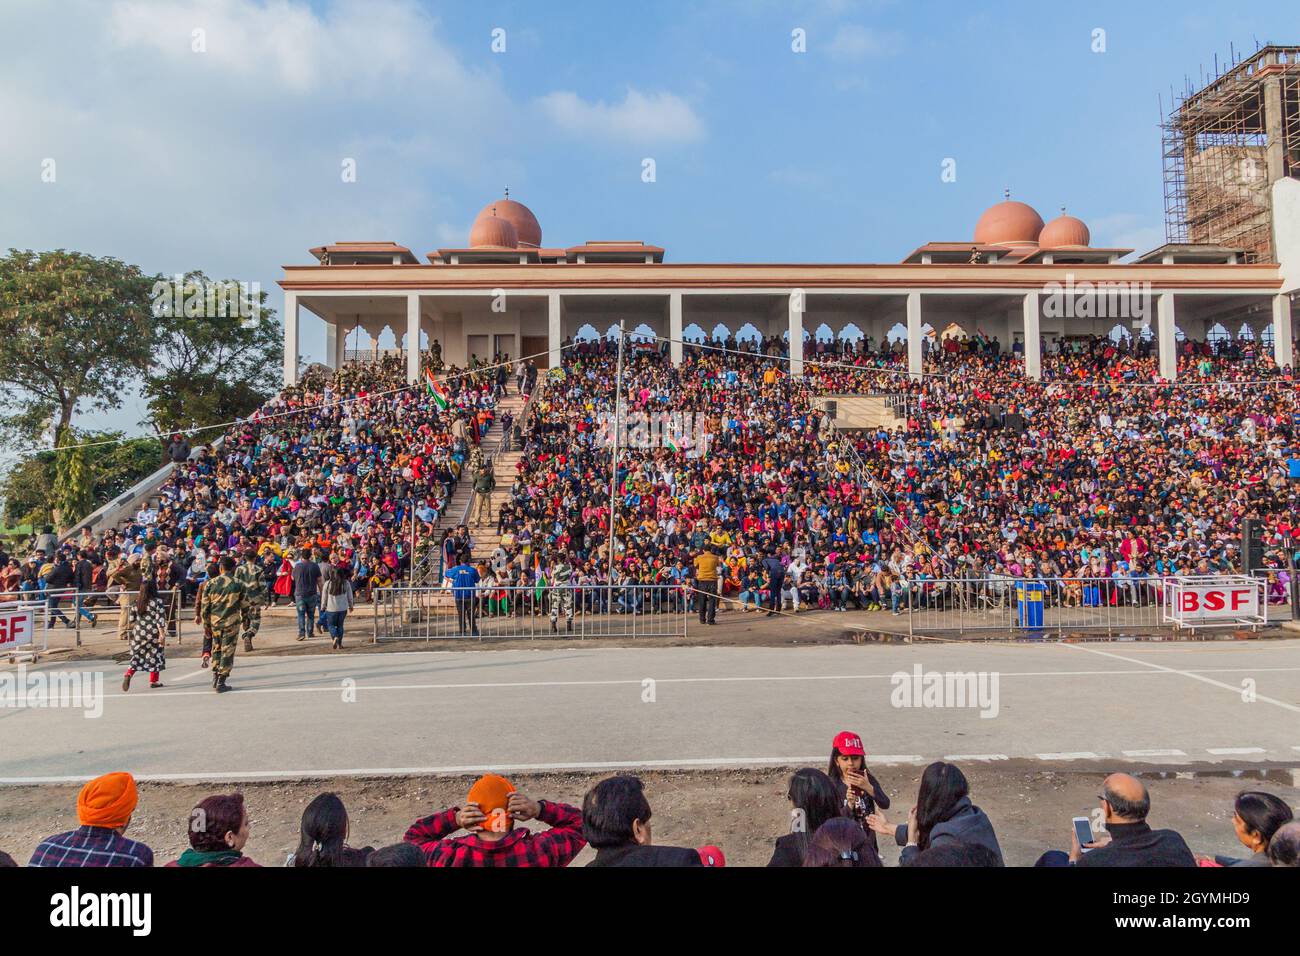 WAGAH, INDIA - JANUARY 26, 2017: Spectators watch the military ceremony at India-Pakistan border in Wagah in Punjab, India. Stock Photo